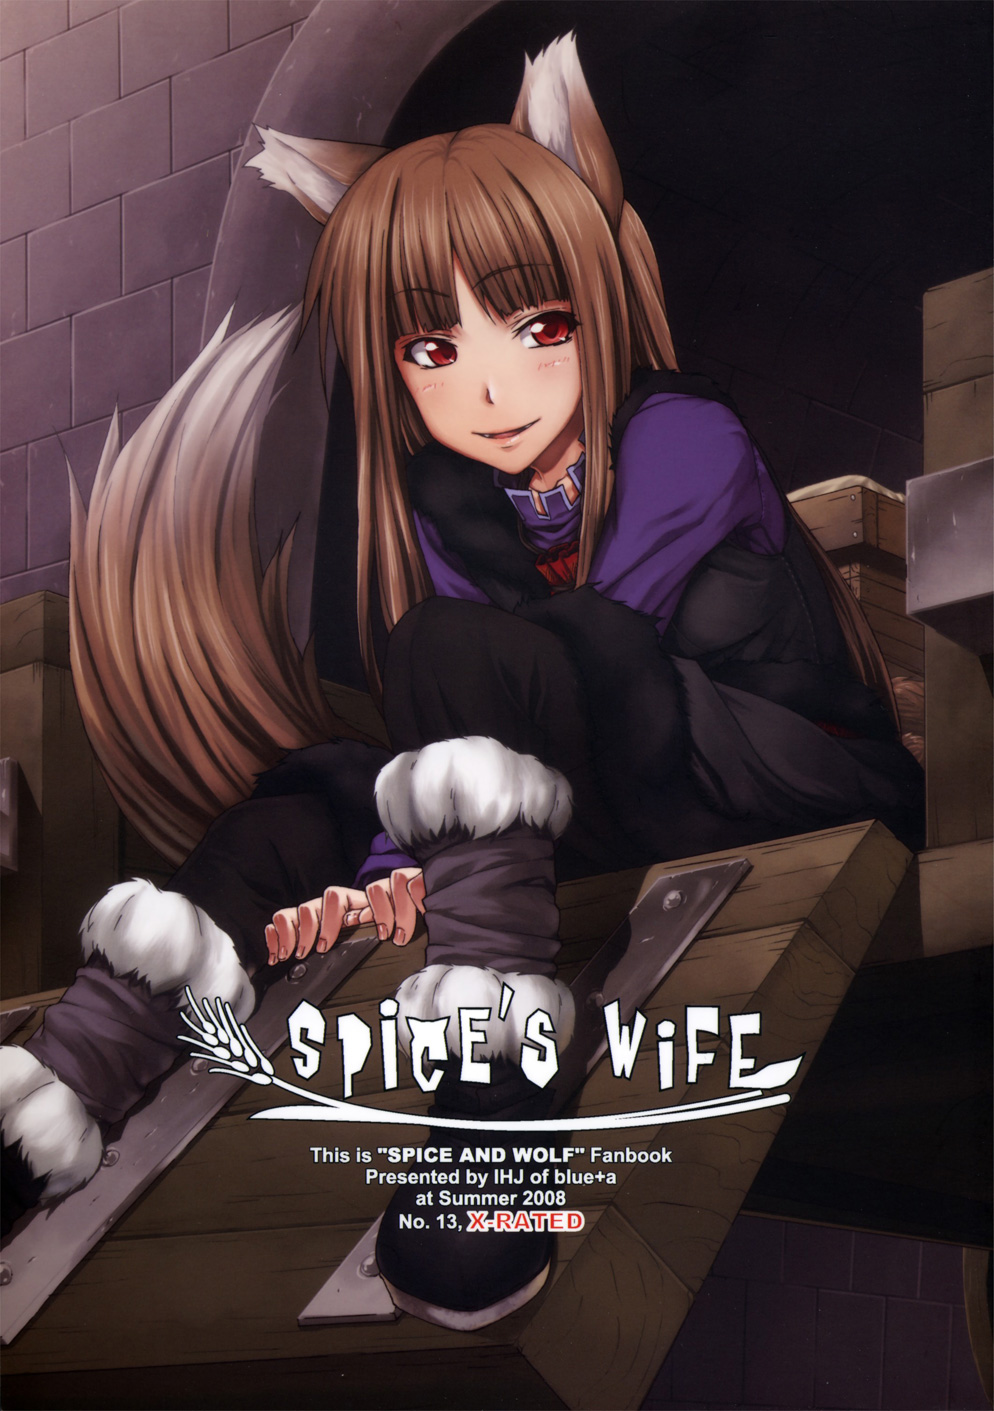 (C74) [blue+α (Ifuji Shinsen)] SPiCE'S WiFE (Spice and Wolf) [Spanish] {NightowScans} (C74) [blue+α (いふじシンセン)] SPiCE'S WiFE (狼と香辛料) [スペイン翻訳]